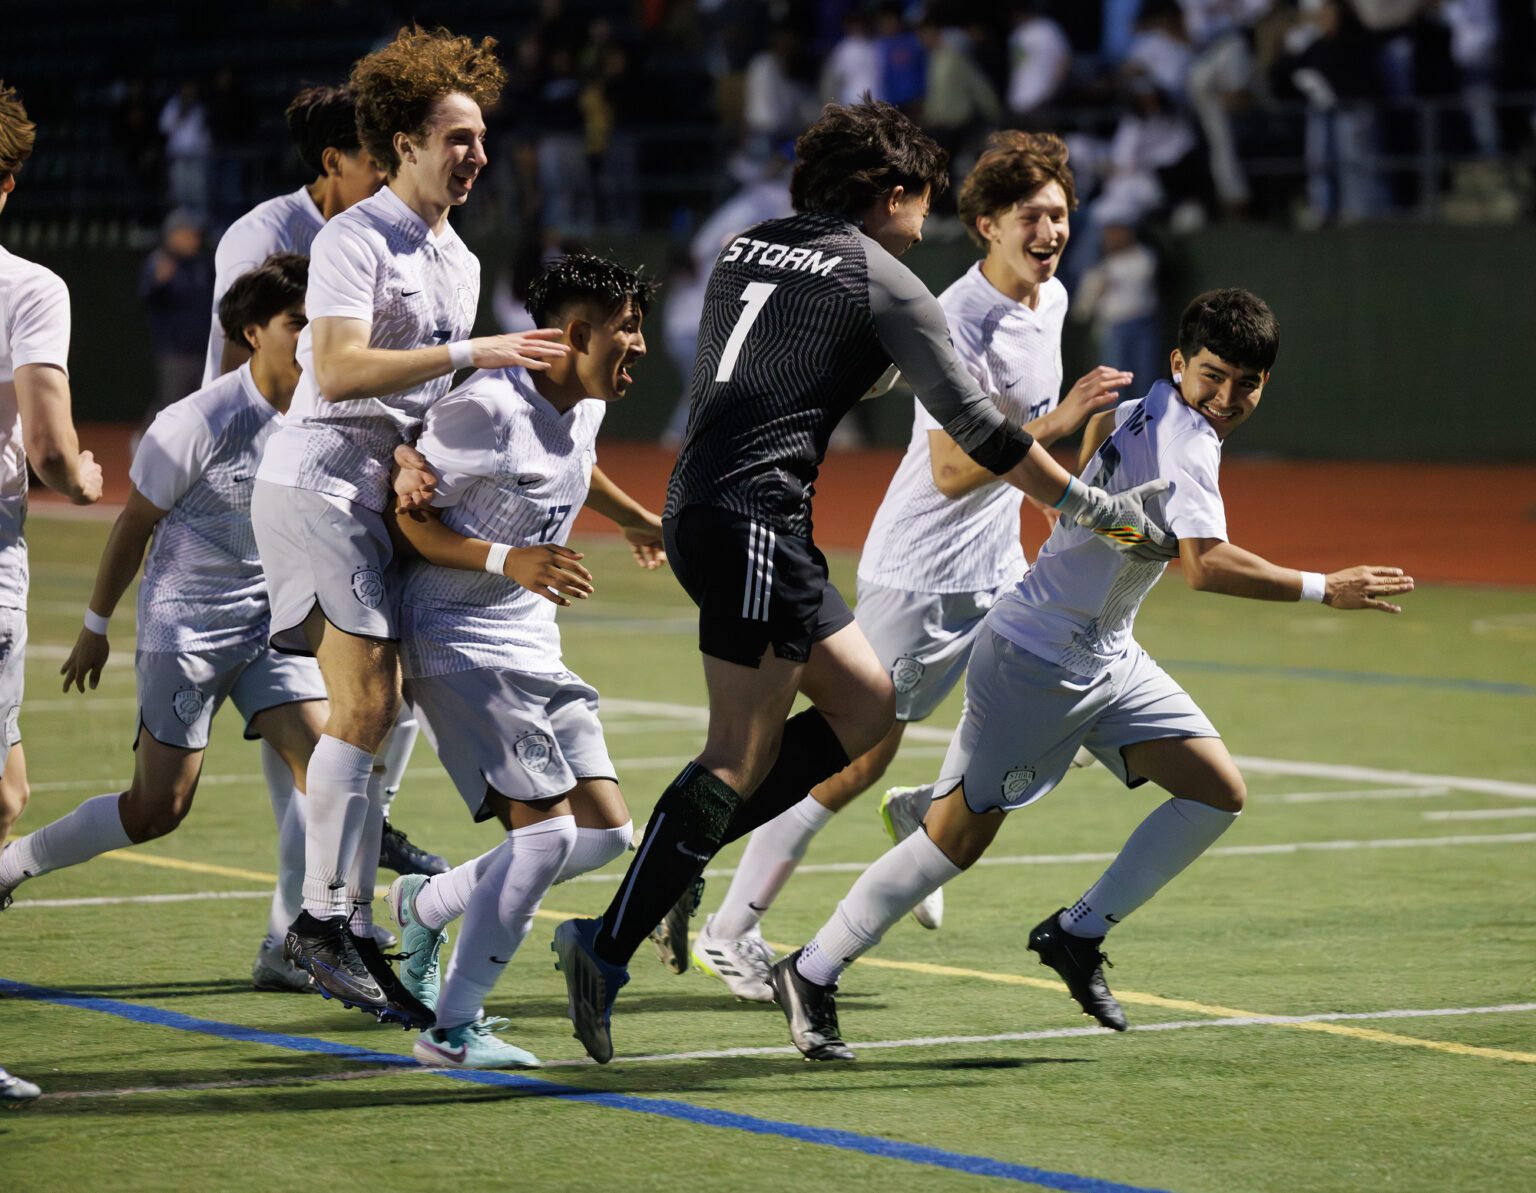 Squalicum players chase Sebastian Cruz Gonzalez, right, Tuesday, May 7 after beating Sehome in a shootout, 1-0, in the 2A District 1 soccer championship at Civic Stadium.